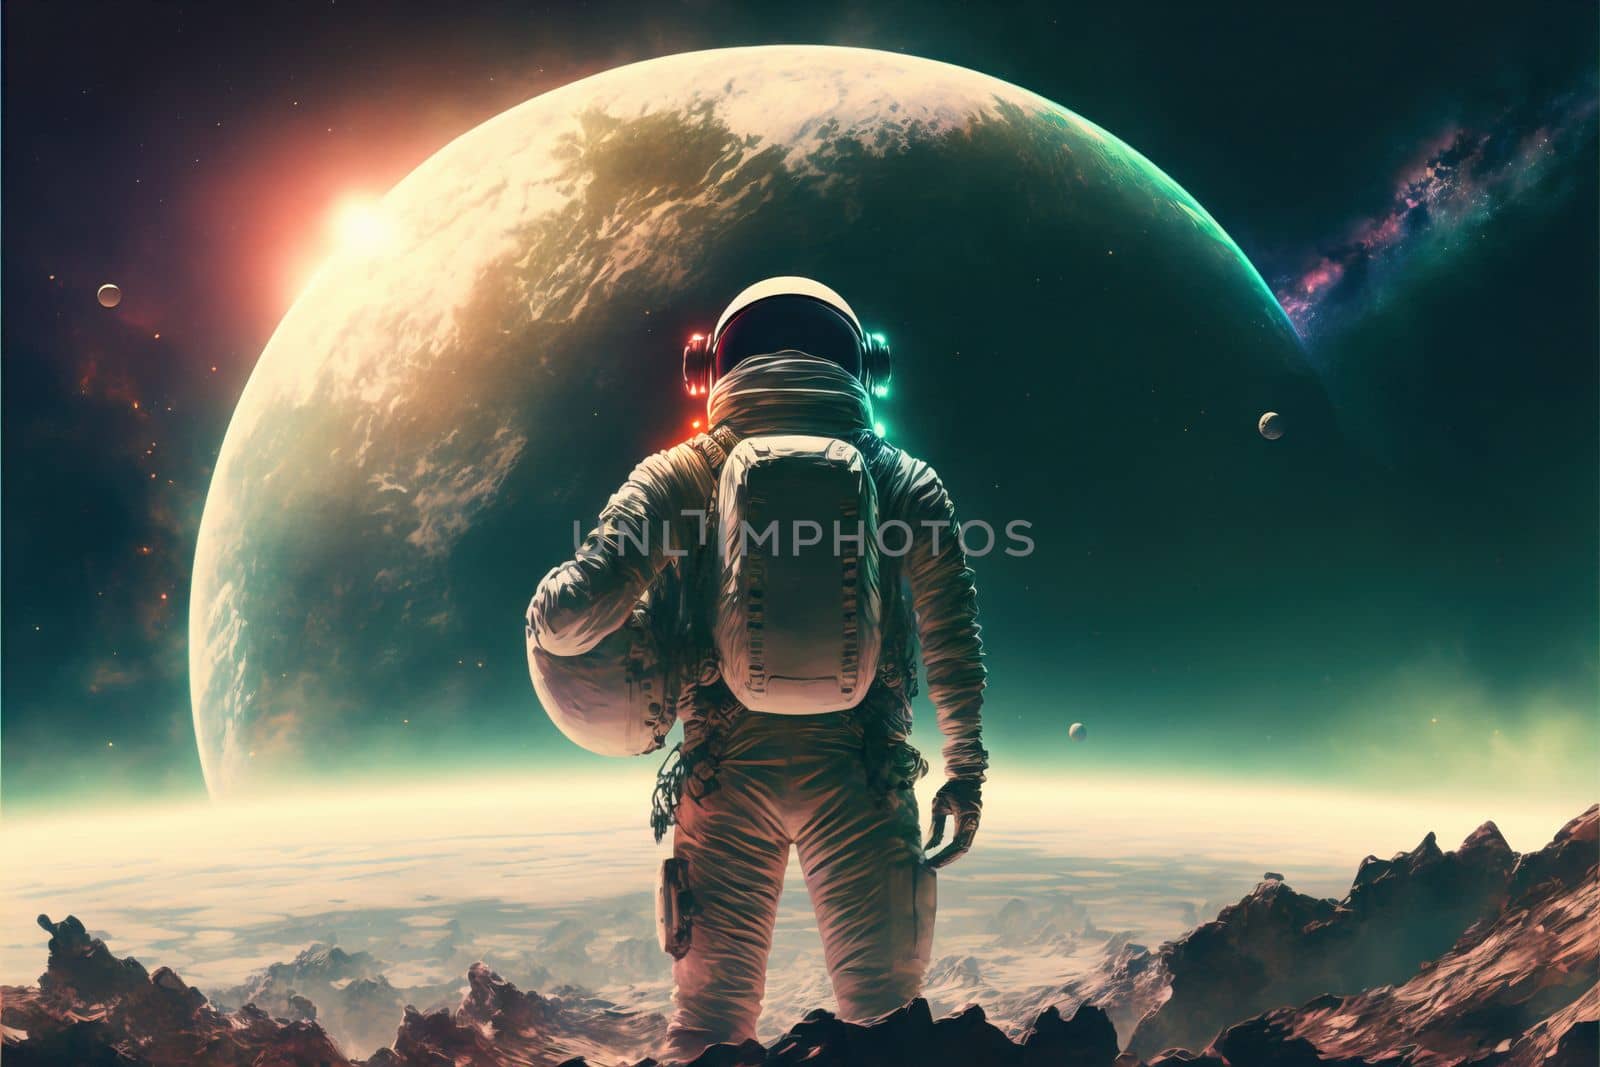 Illustration of Astronaut on Planet Watching on moon with sunrise. Future First Manned Mission To planet, Technological Advance Brings Space Exploration, Colonization. by igor010